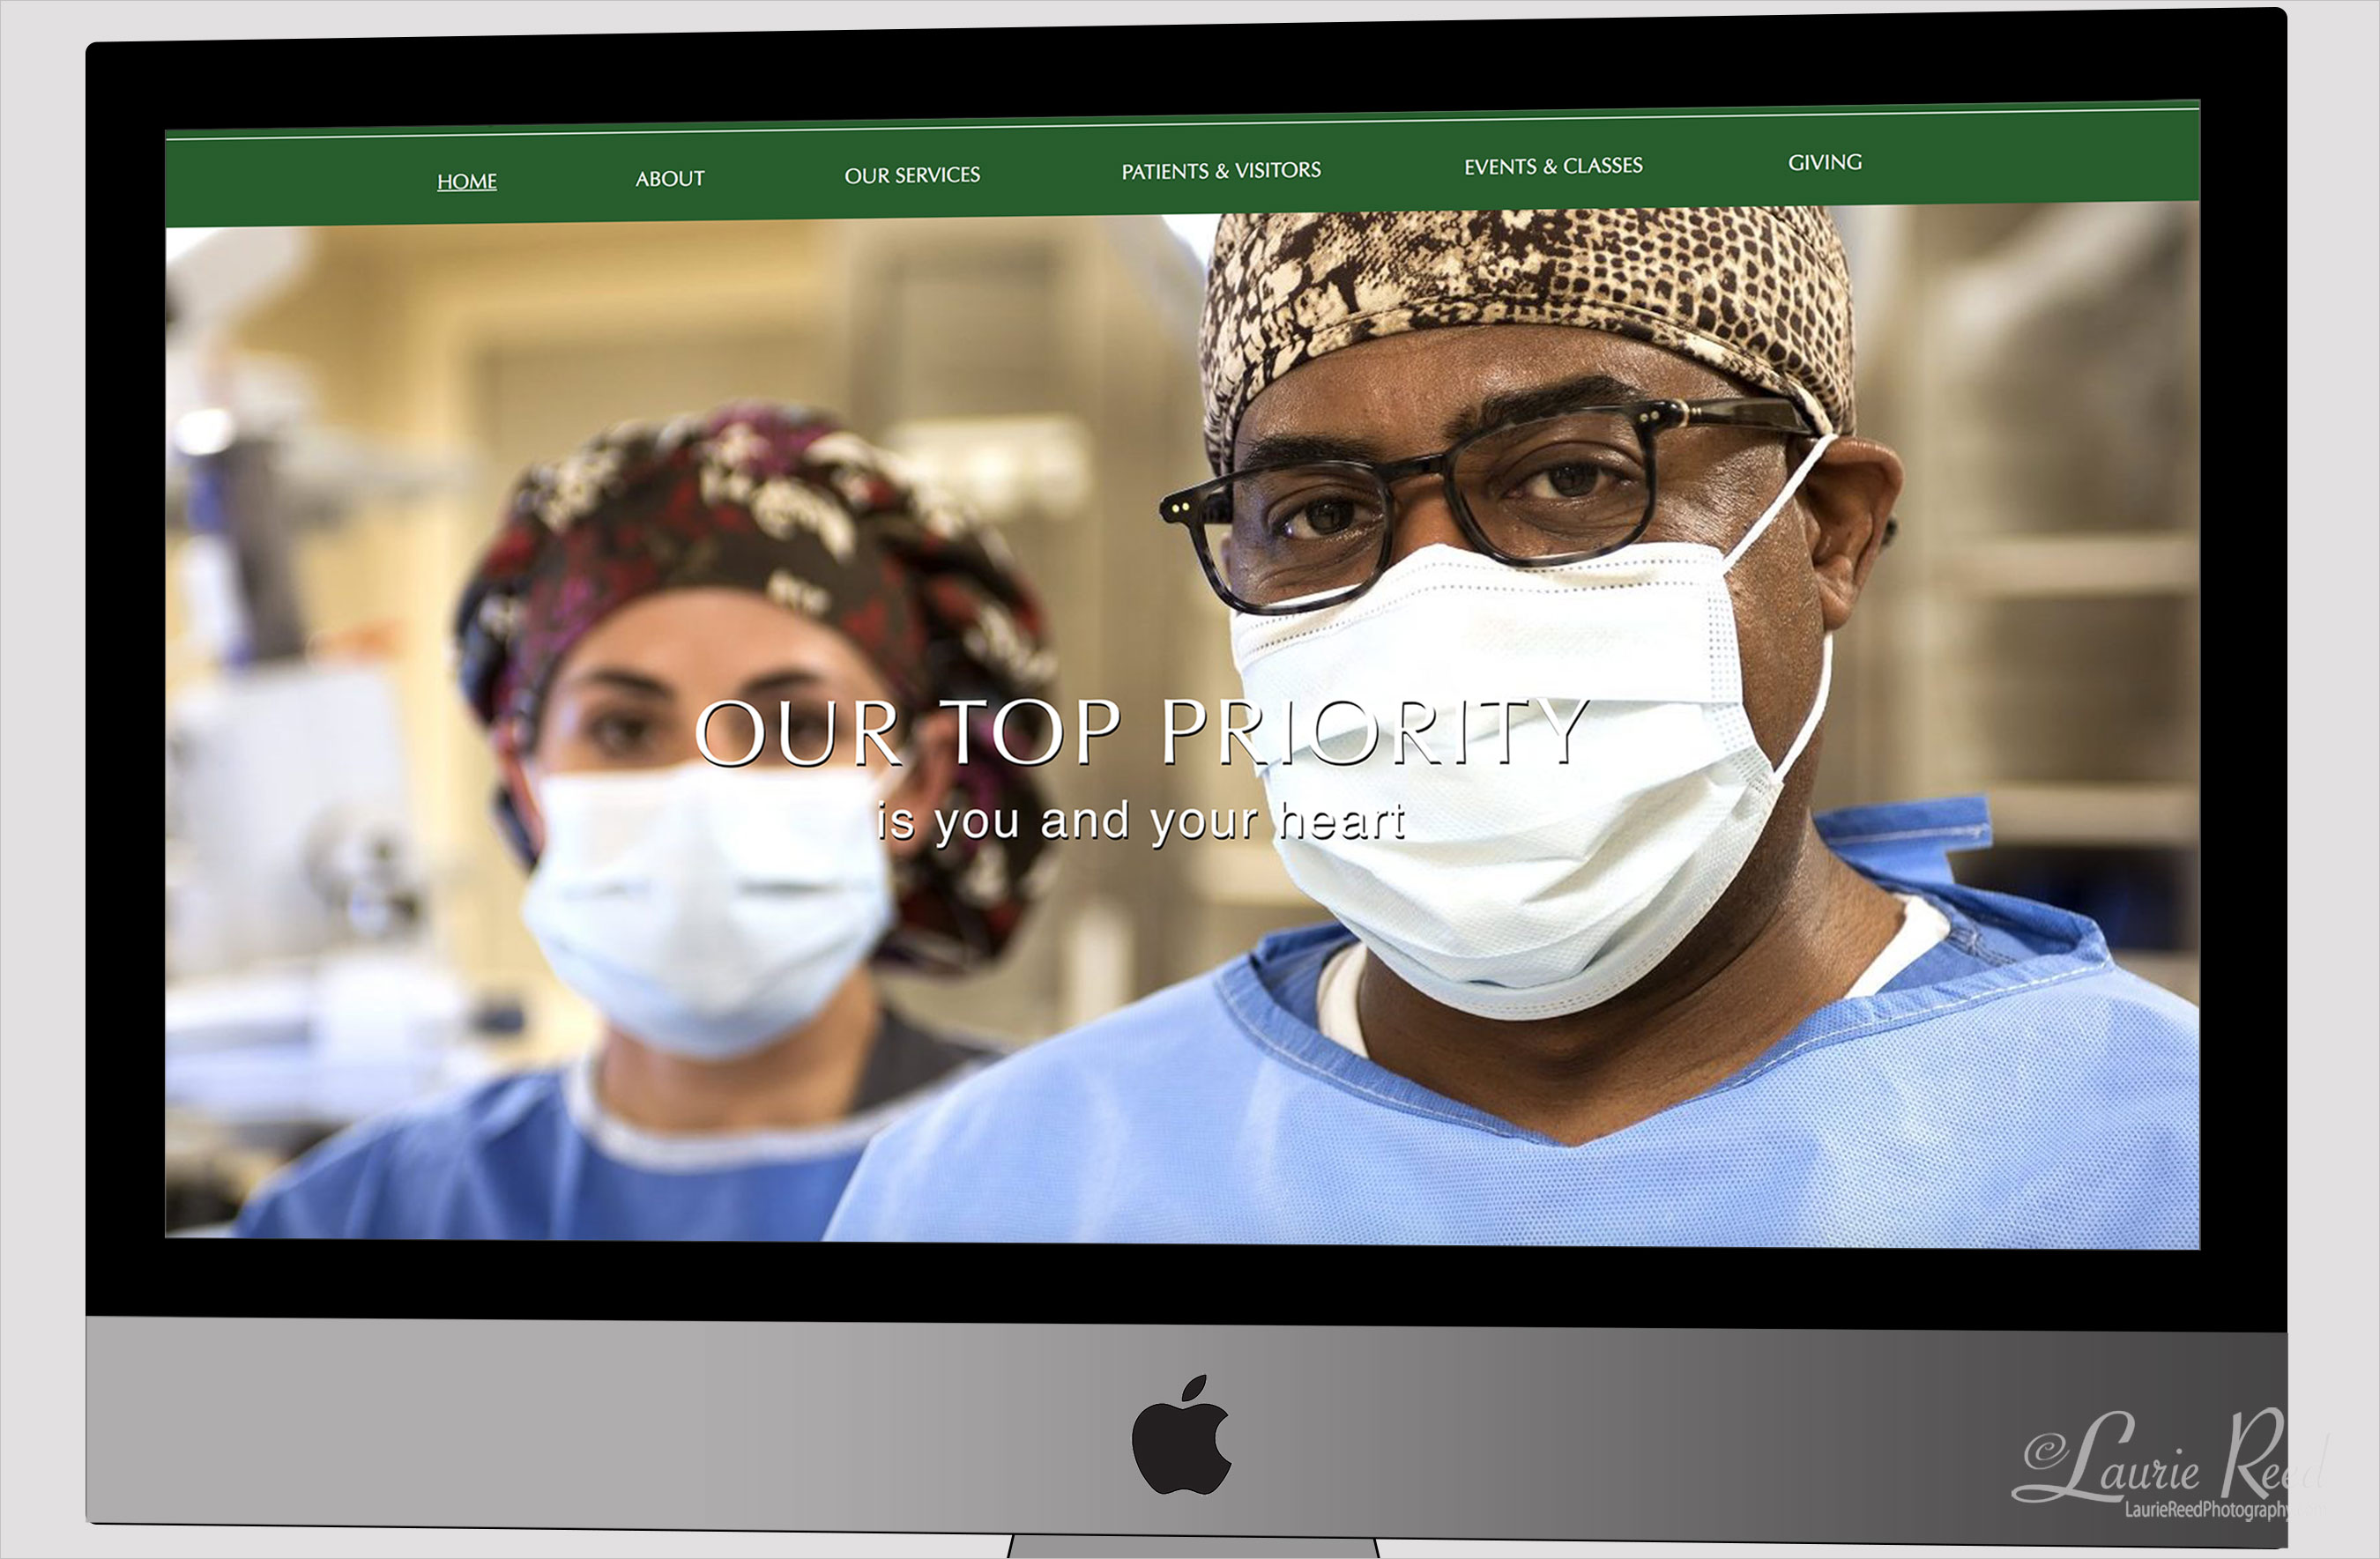 Medical Photographer | Website Photography | Laurie Reed Photography